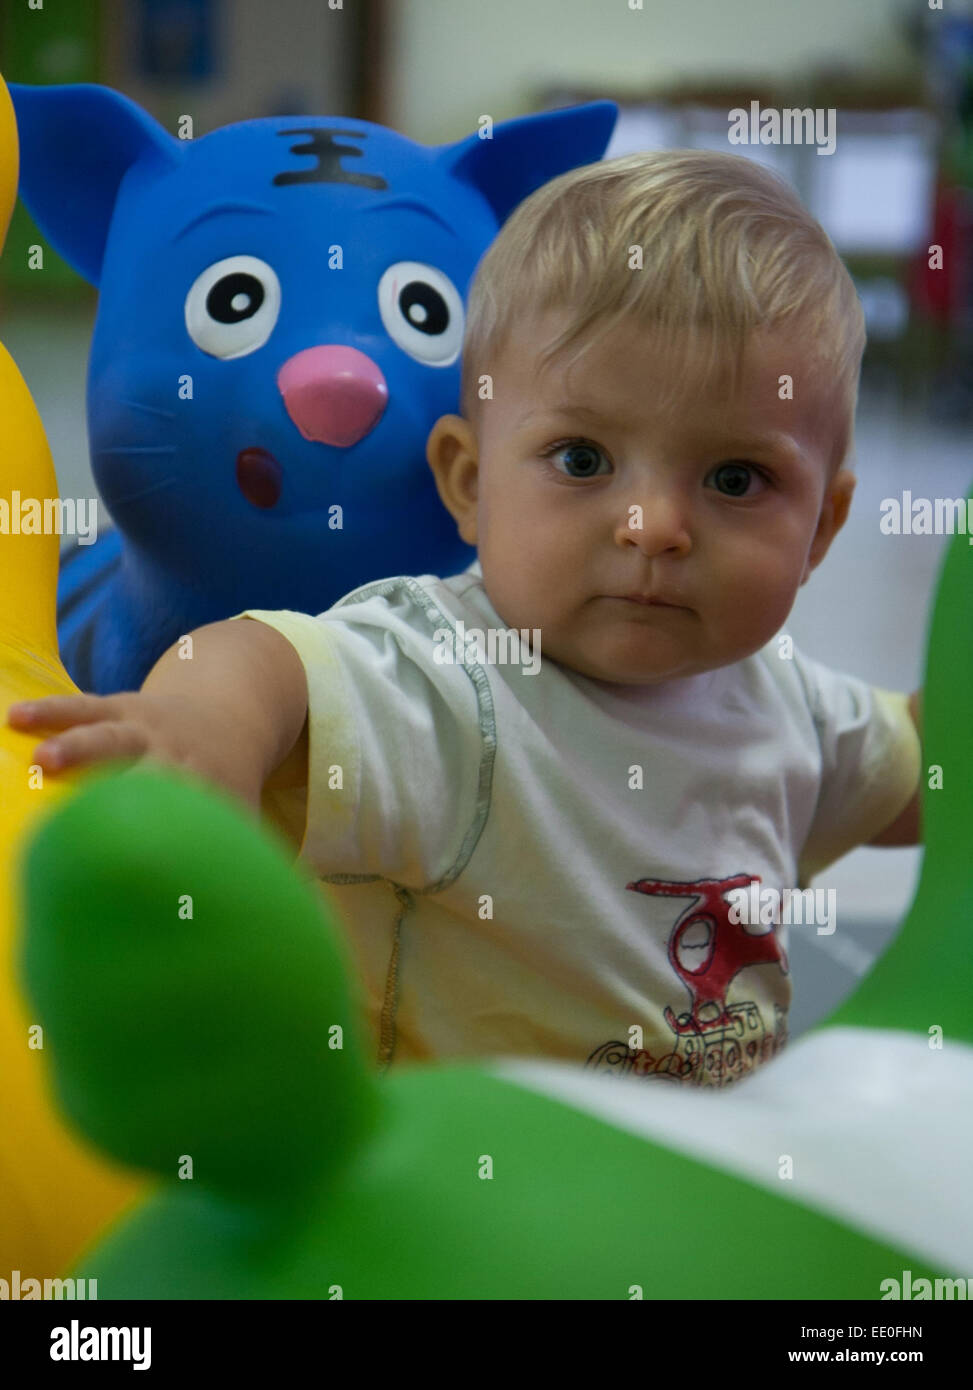 close up of blond child in playroom Stock Photo